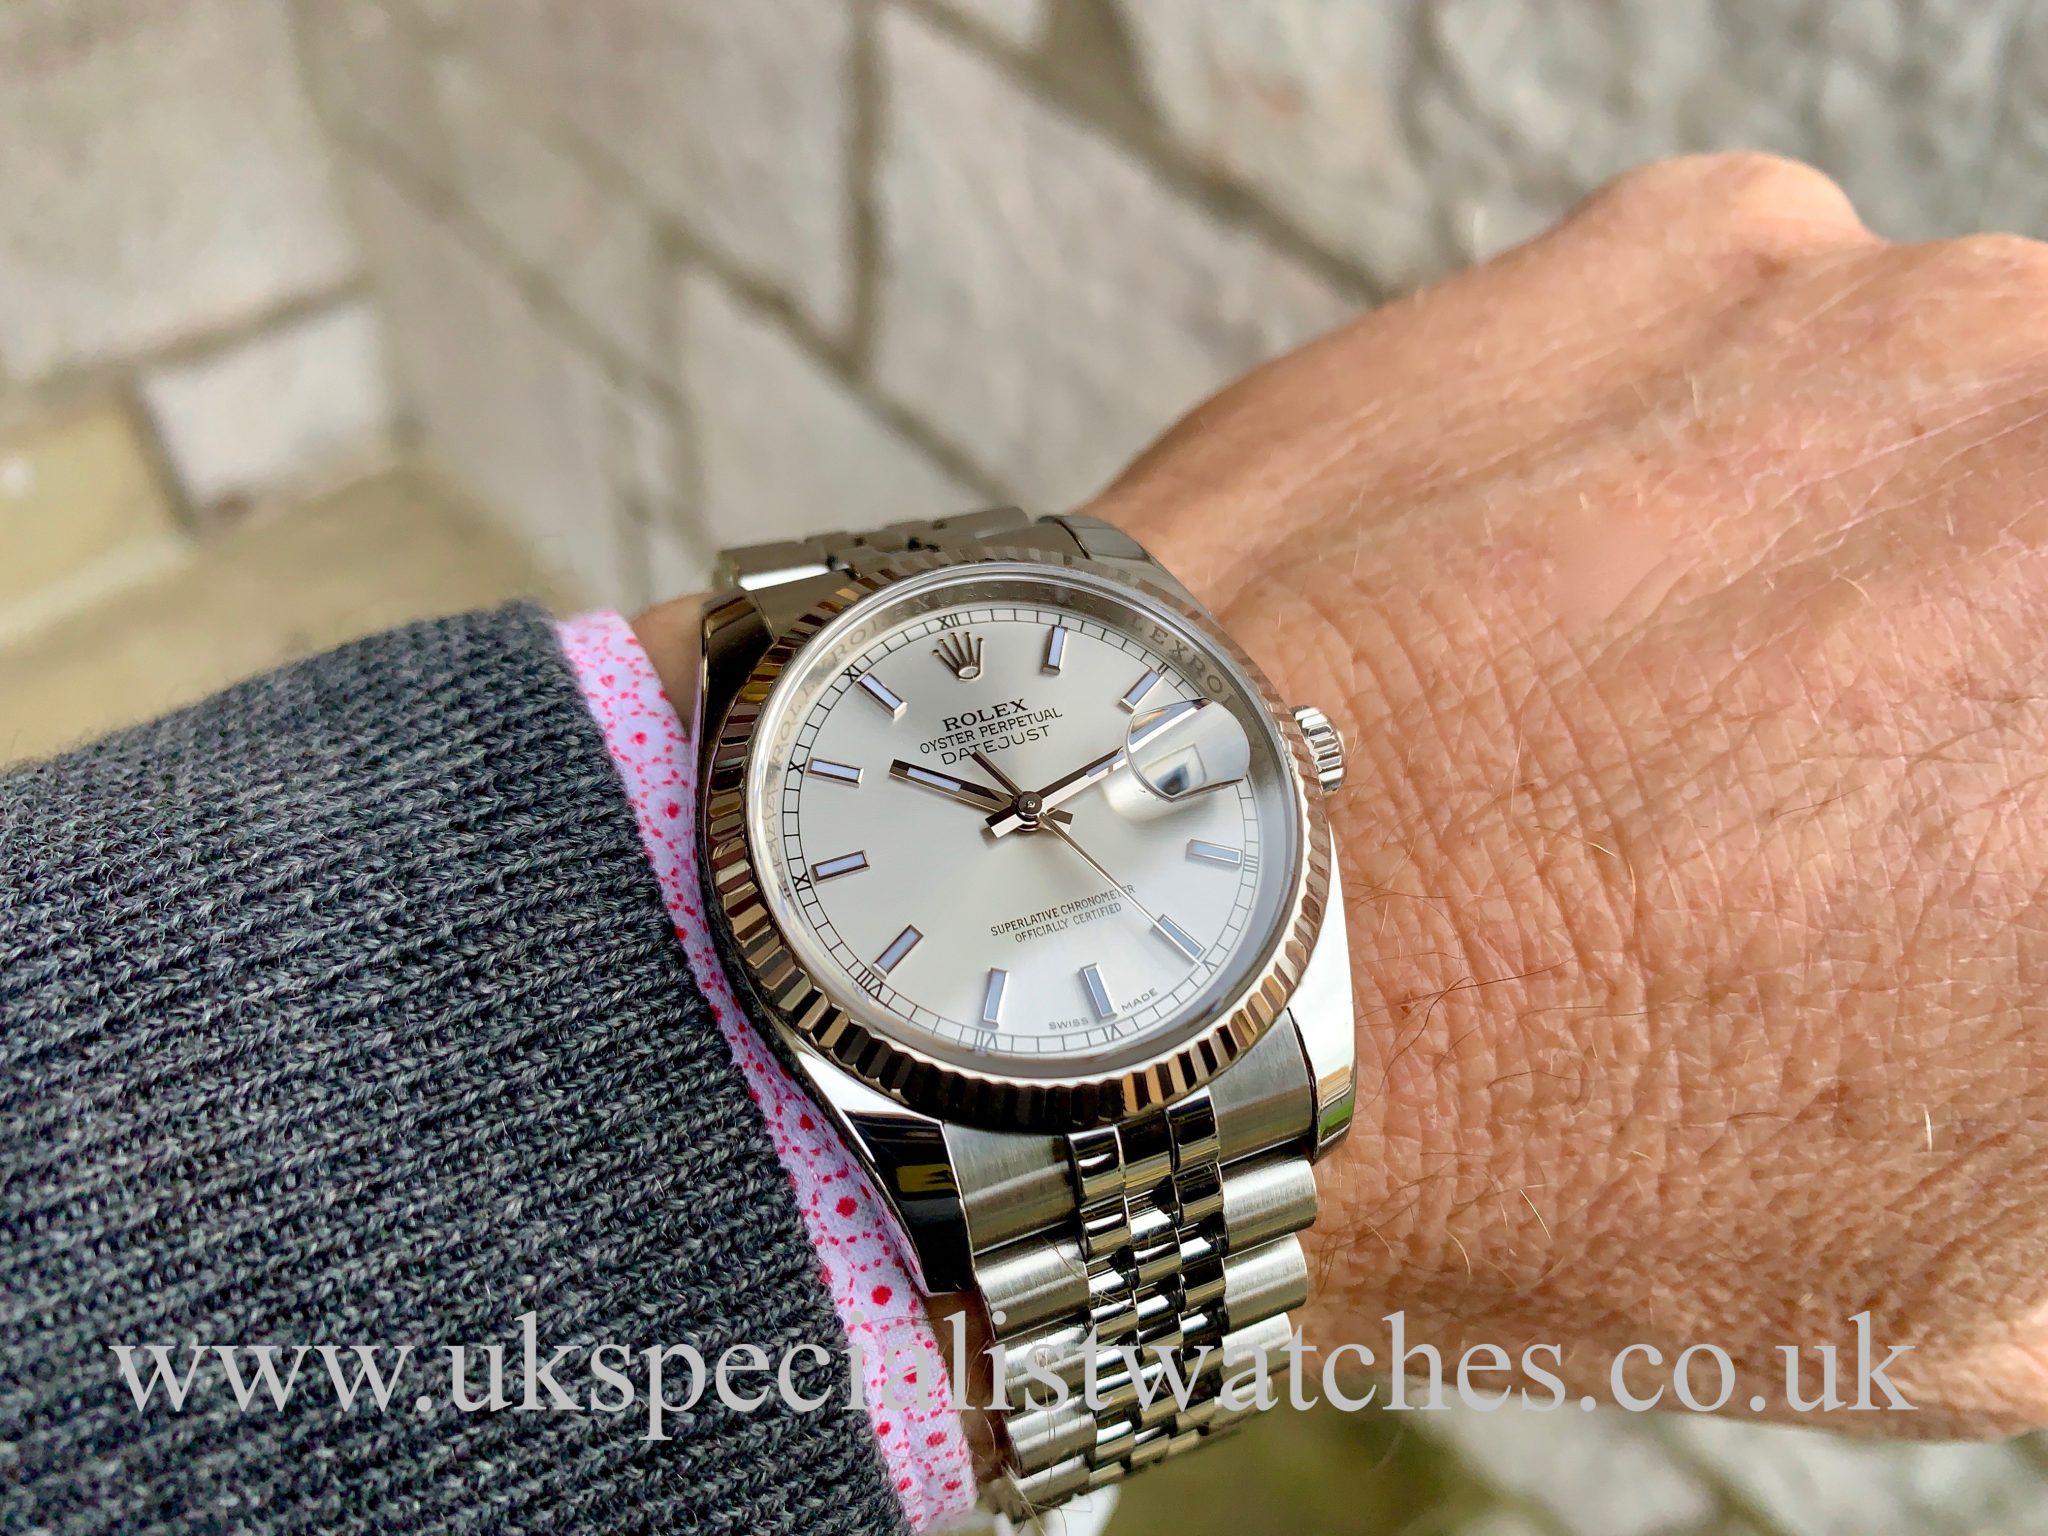 datejust 36mm silver dial